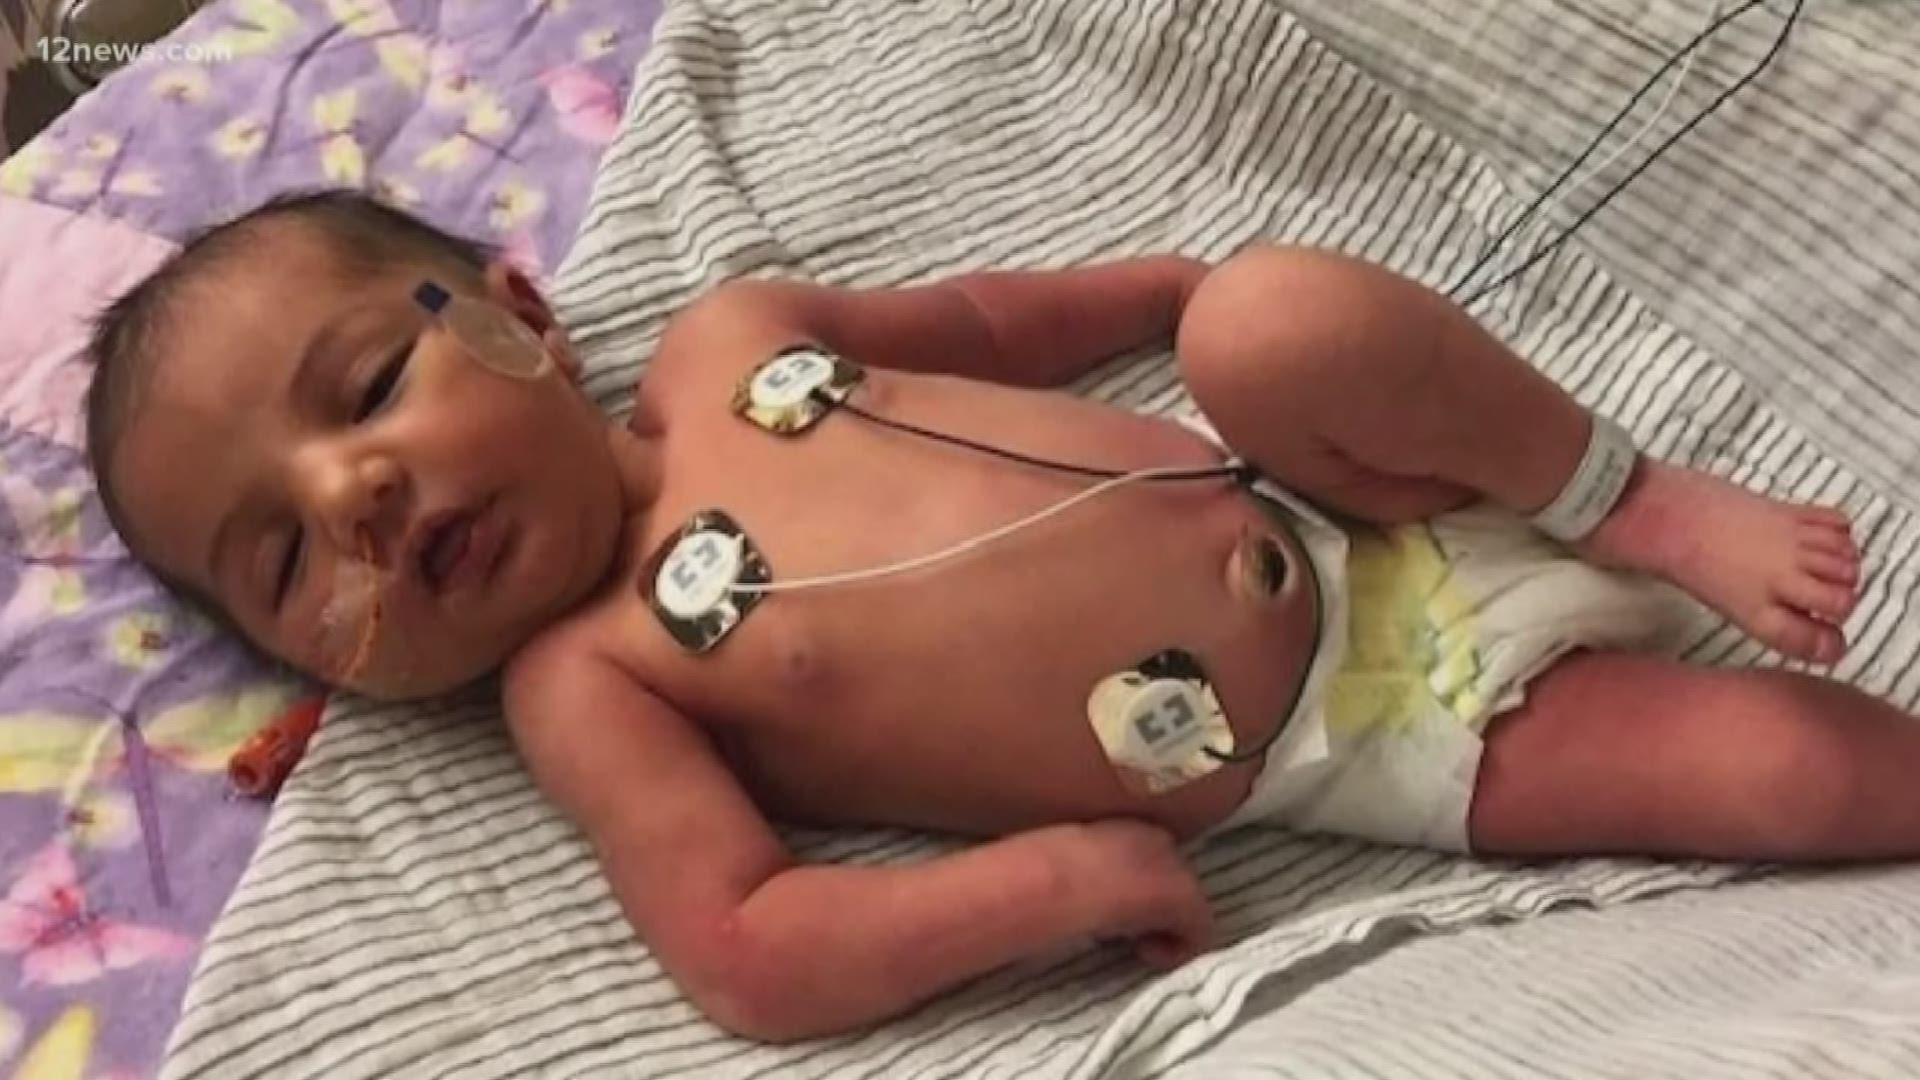 A Valley couple's six-month-old is suffering from a rare disorder which doctors have known about for less than a decade. The family says their daughter is the only case Phoenix Children's Hospital has ever seen.